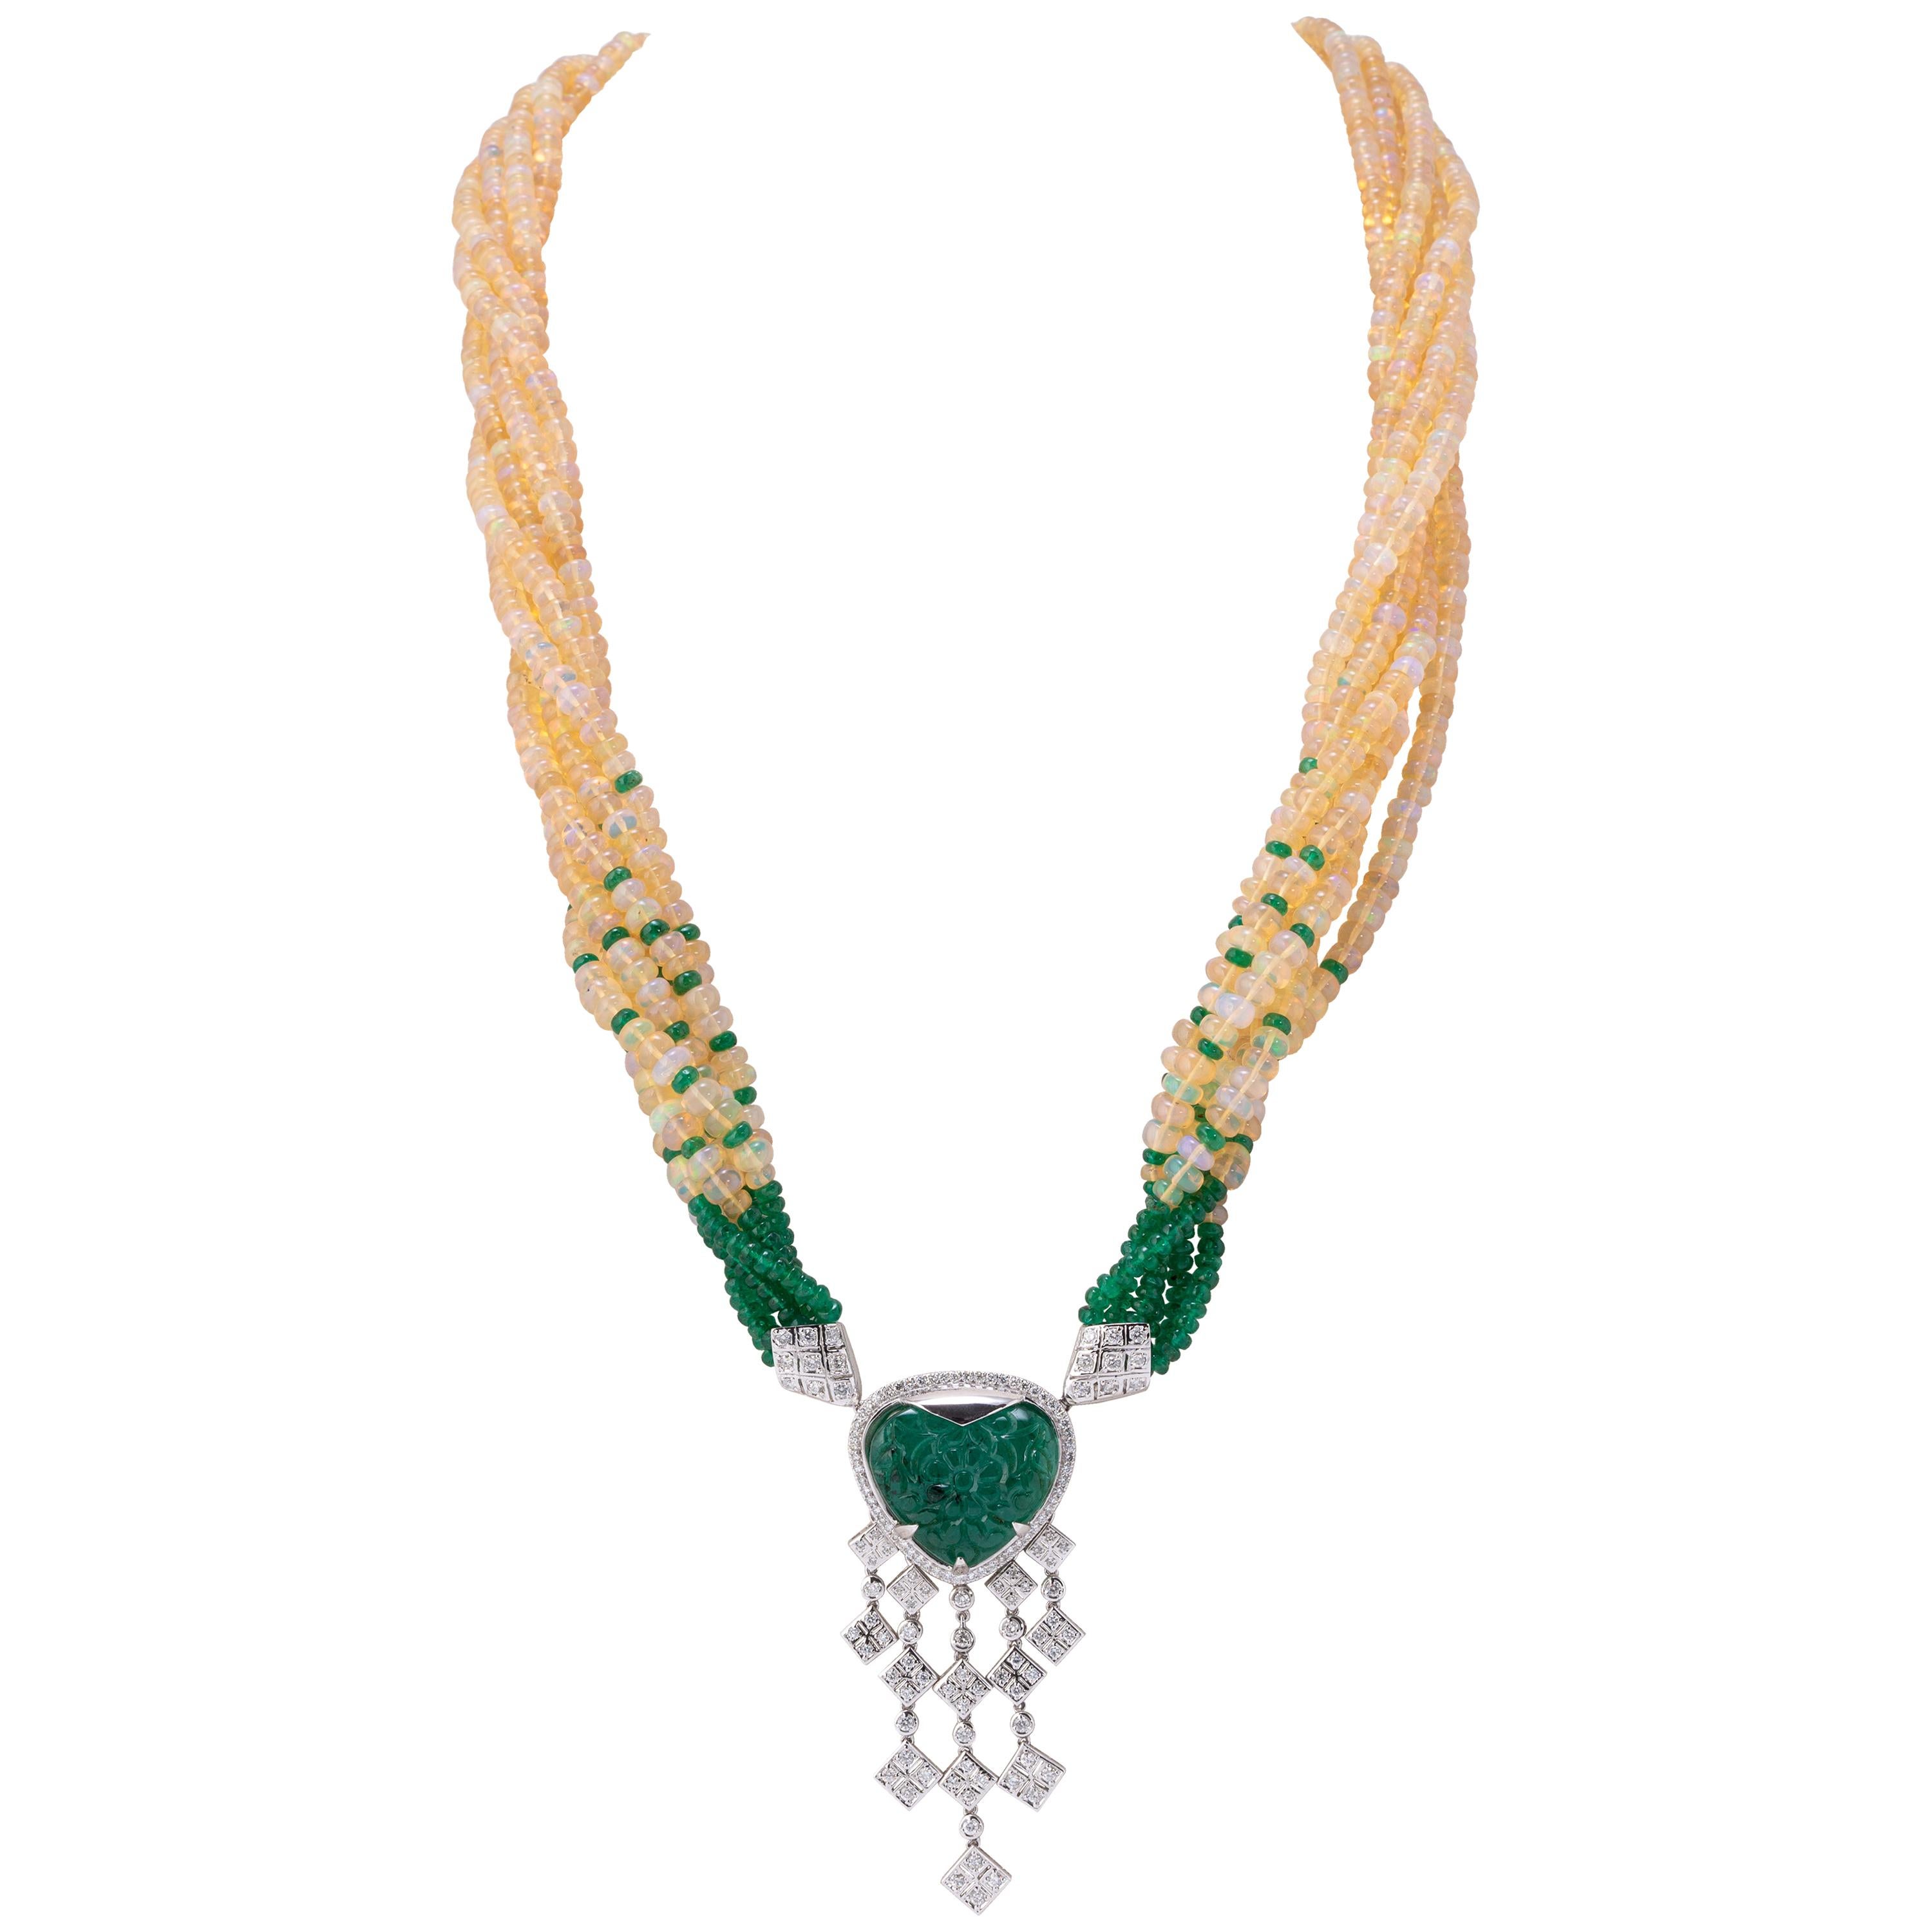 Carved Emerald and Opal Beads 18K Gold Multi-Strand Necklace For Sale